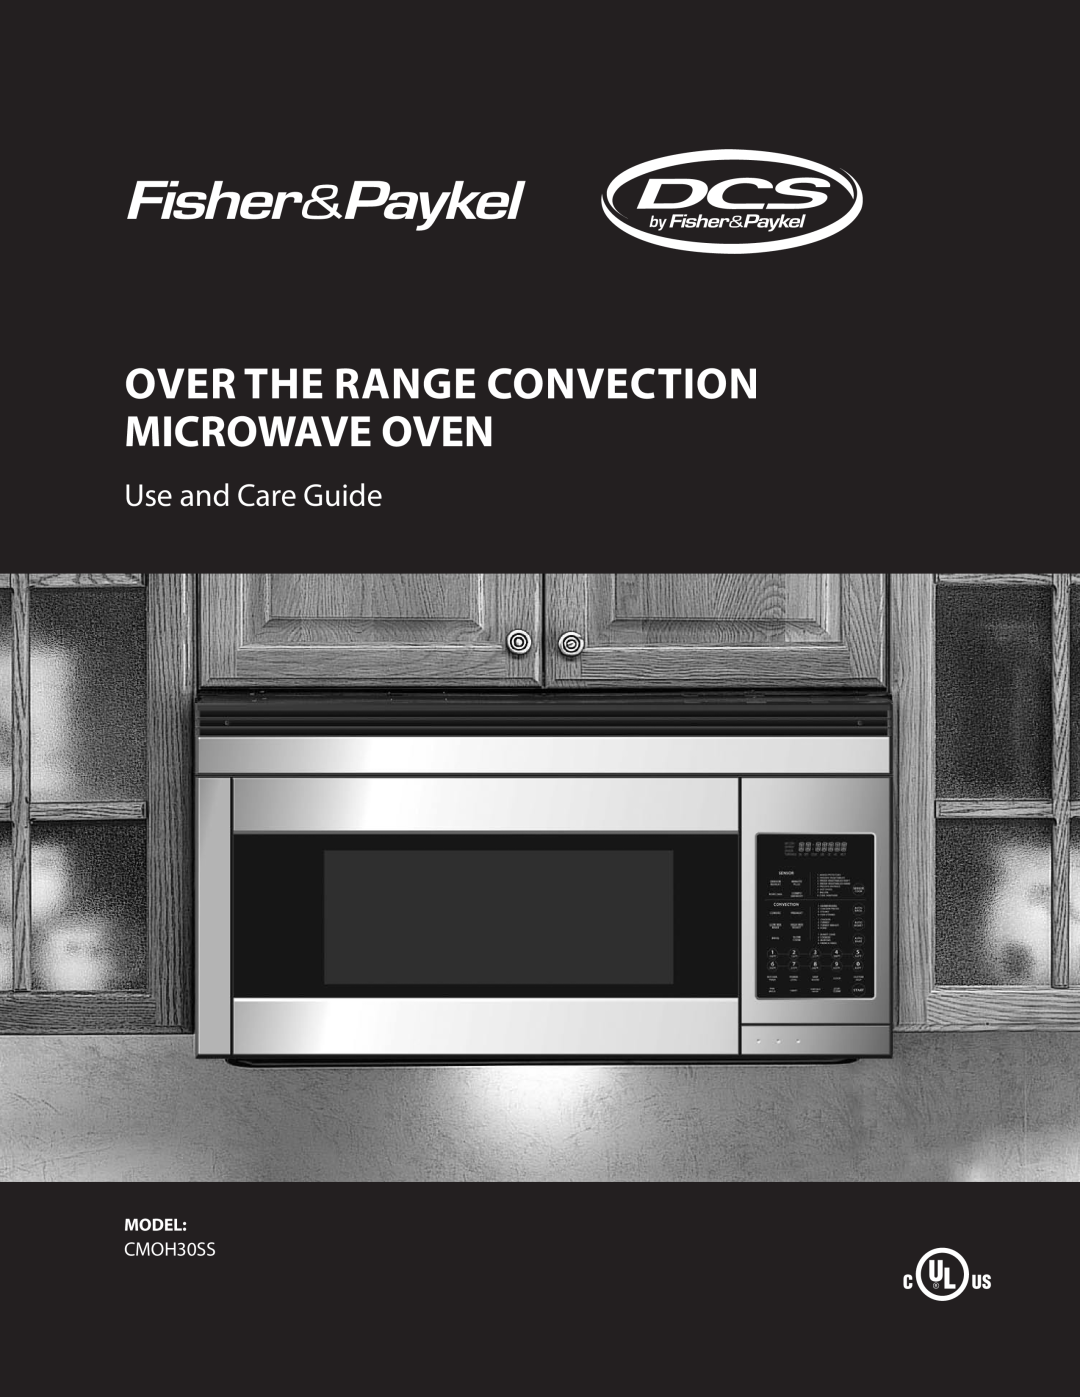 DCS CMOH30SS manual OVER THE RANGE convection MICROWAVE OVEN, Use and Care Guide, Model 